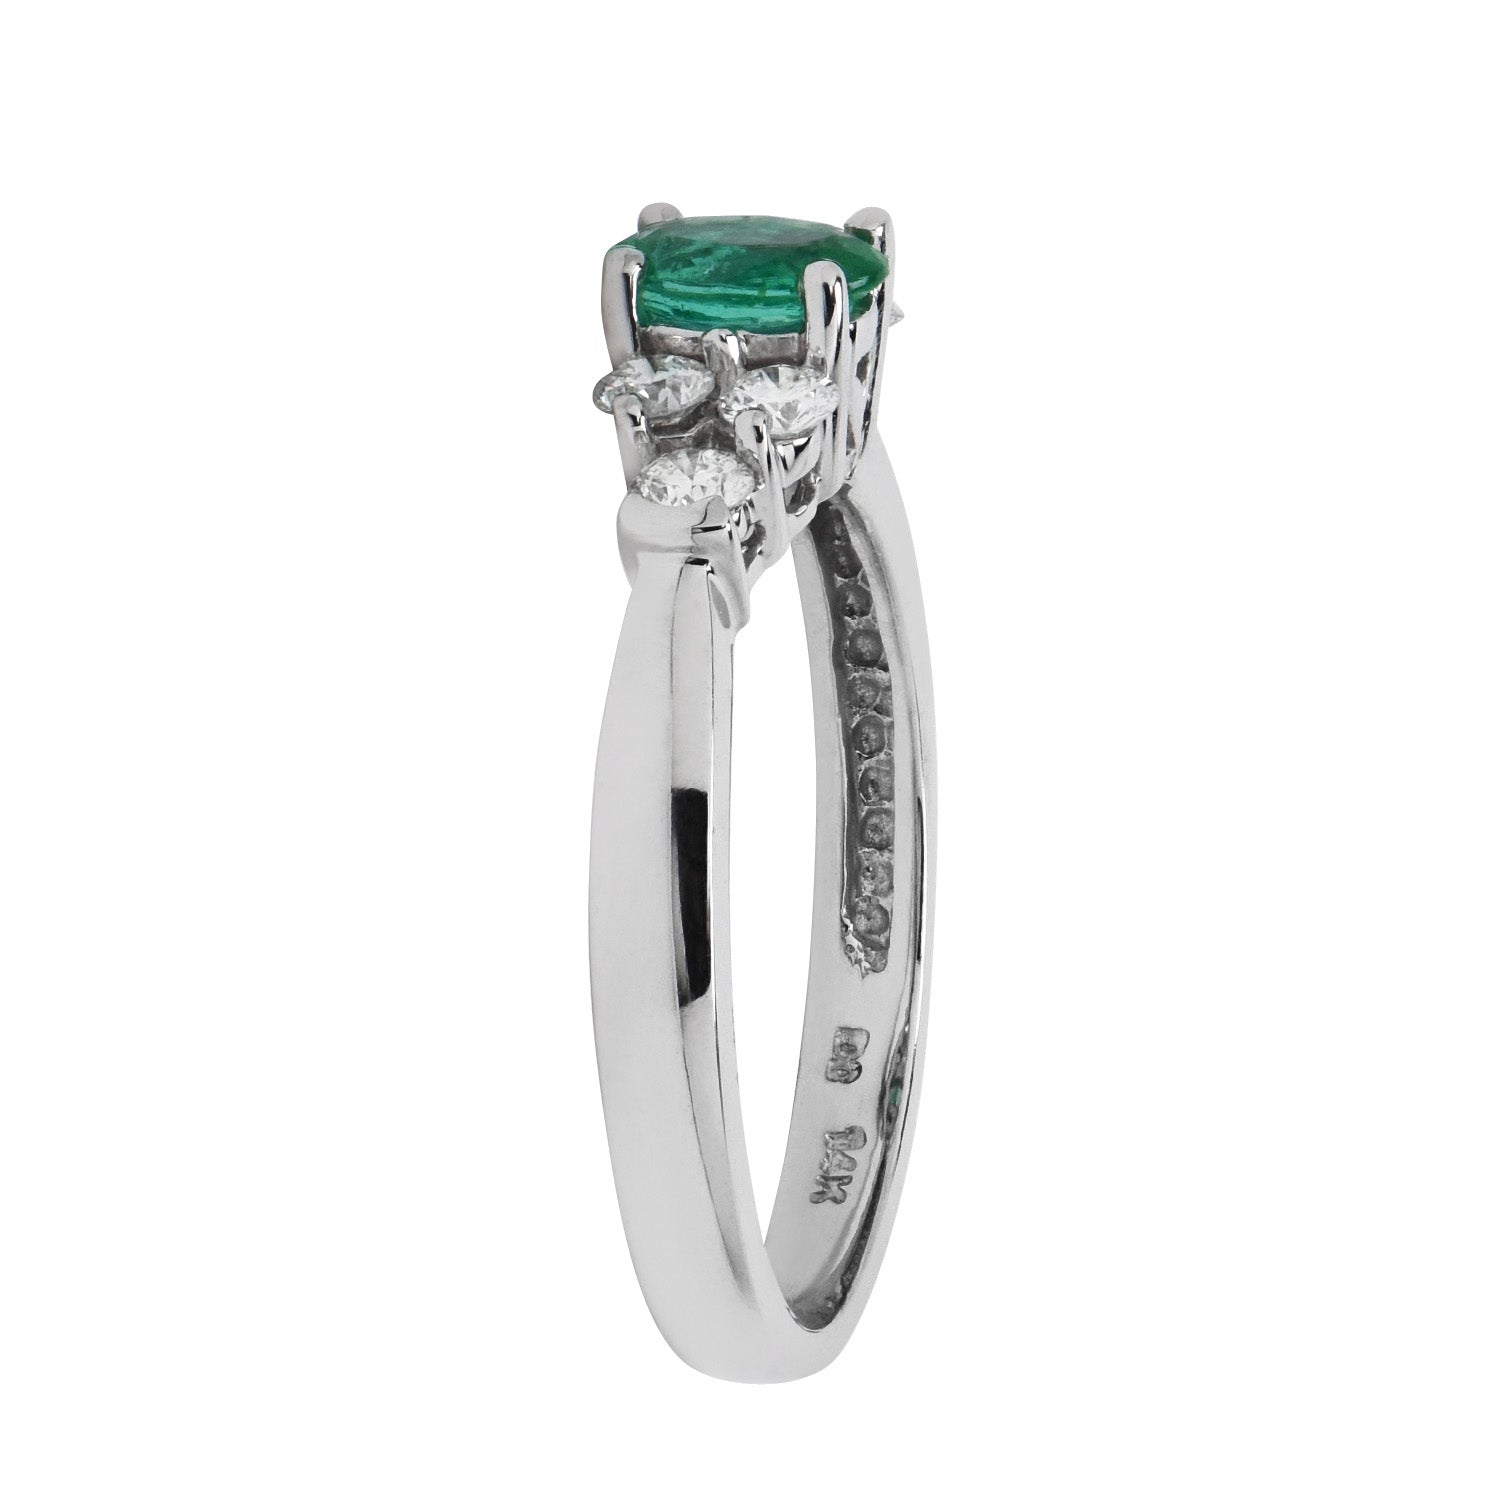 Oval Emerald Ring in 14kt White Gold with Diamonds (1/3ct tw)